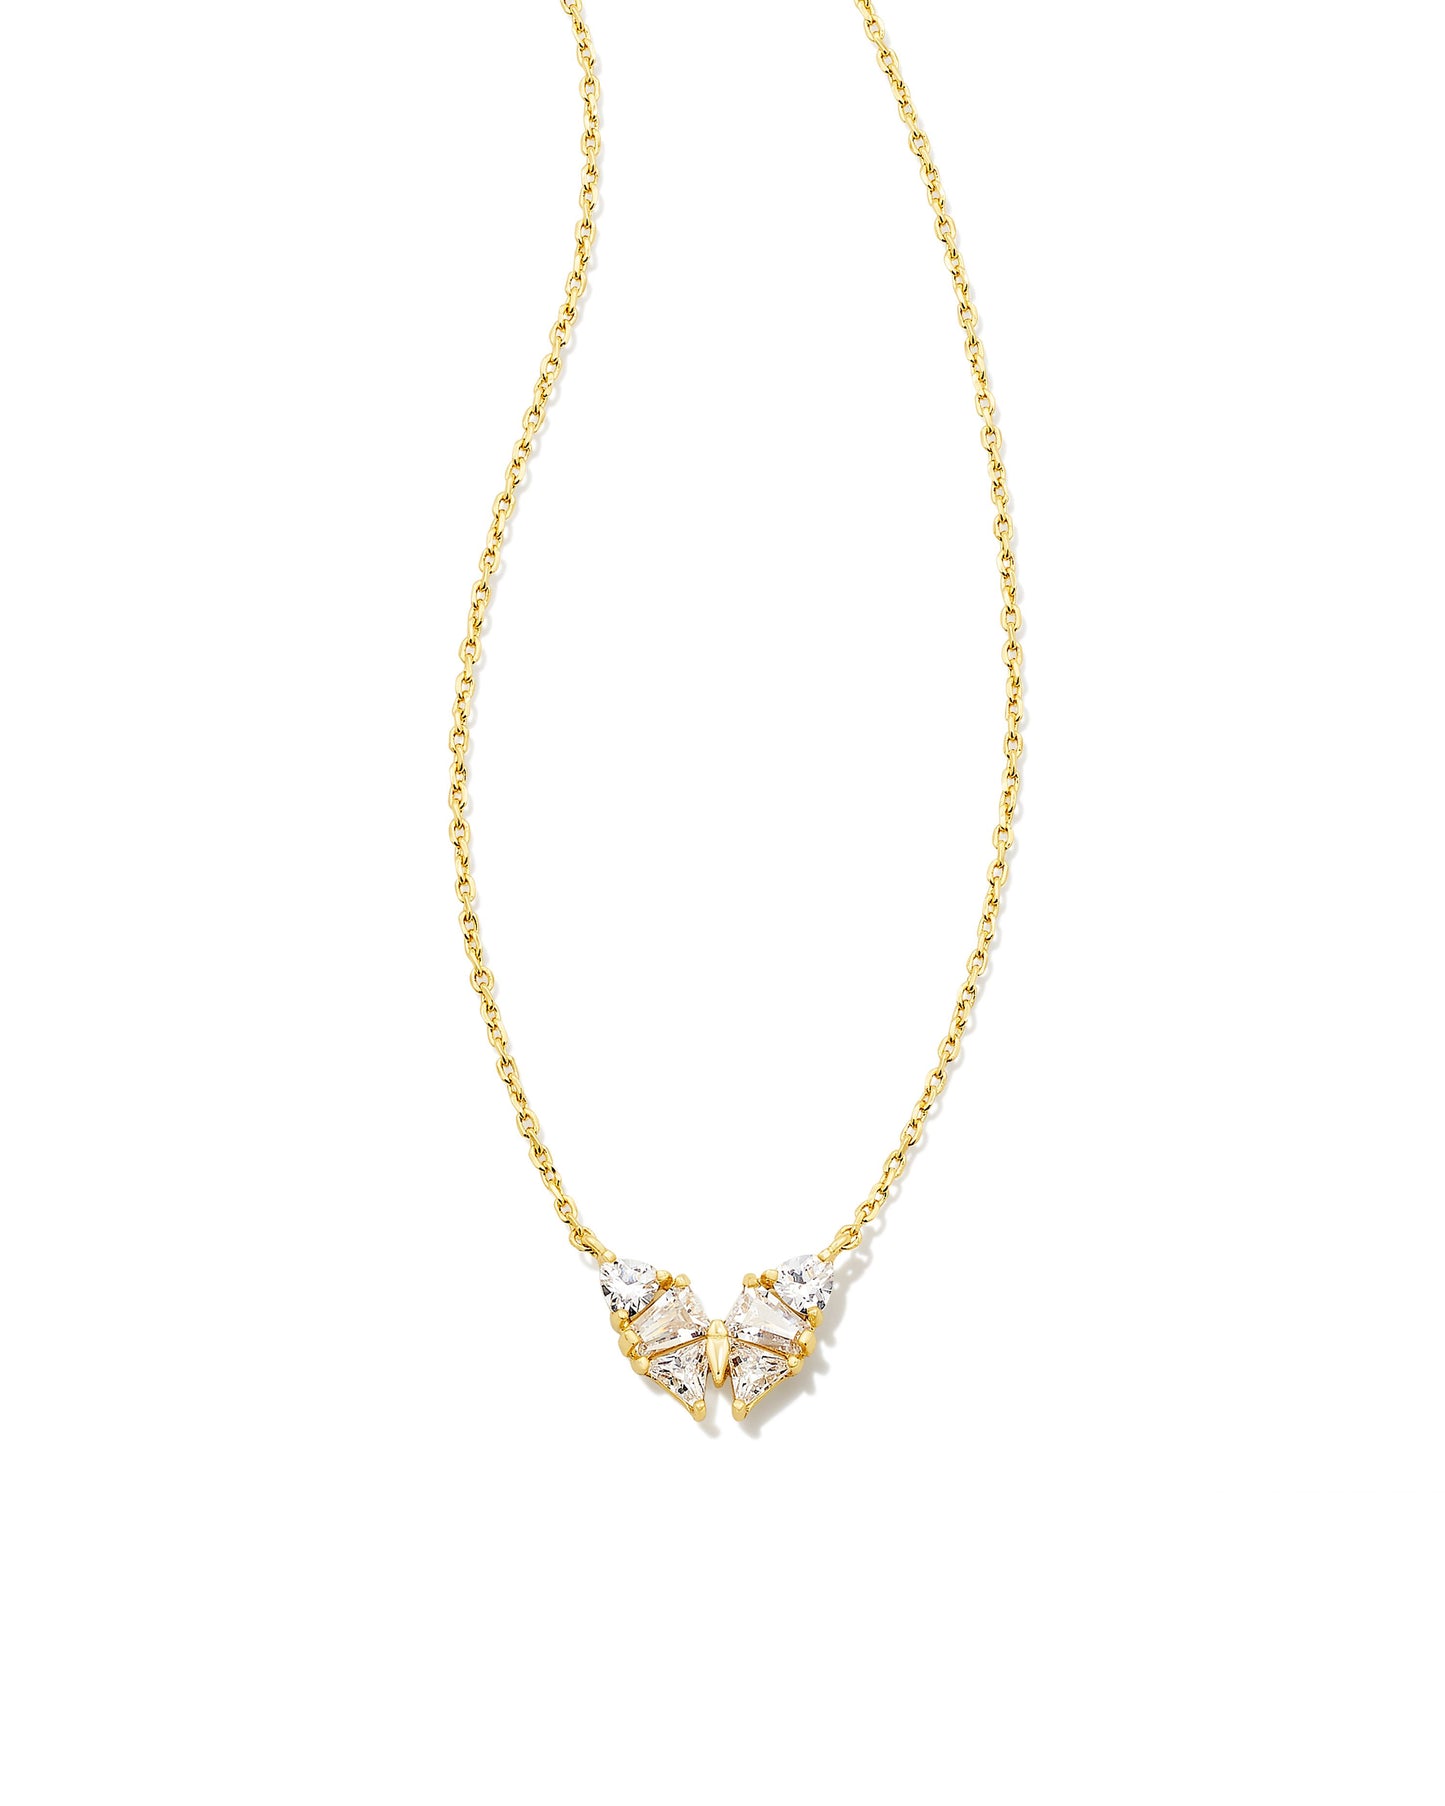 Kendra Scott Blair Butterfly Small Short Pendant Necklace - Gold White CZ